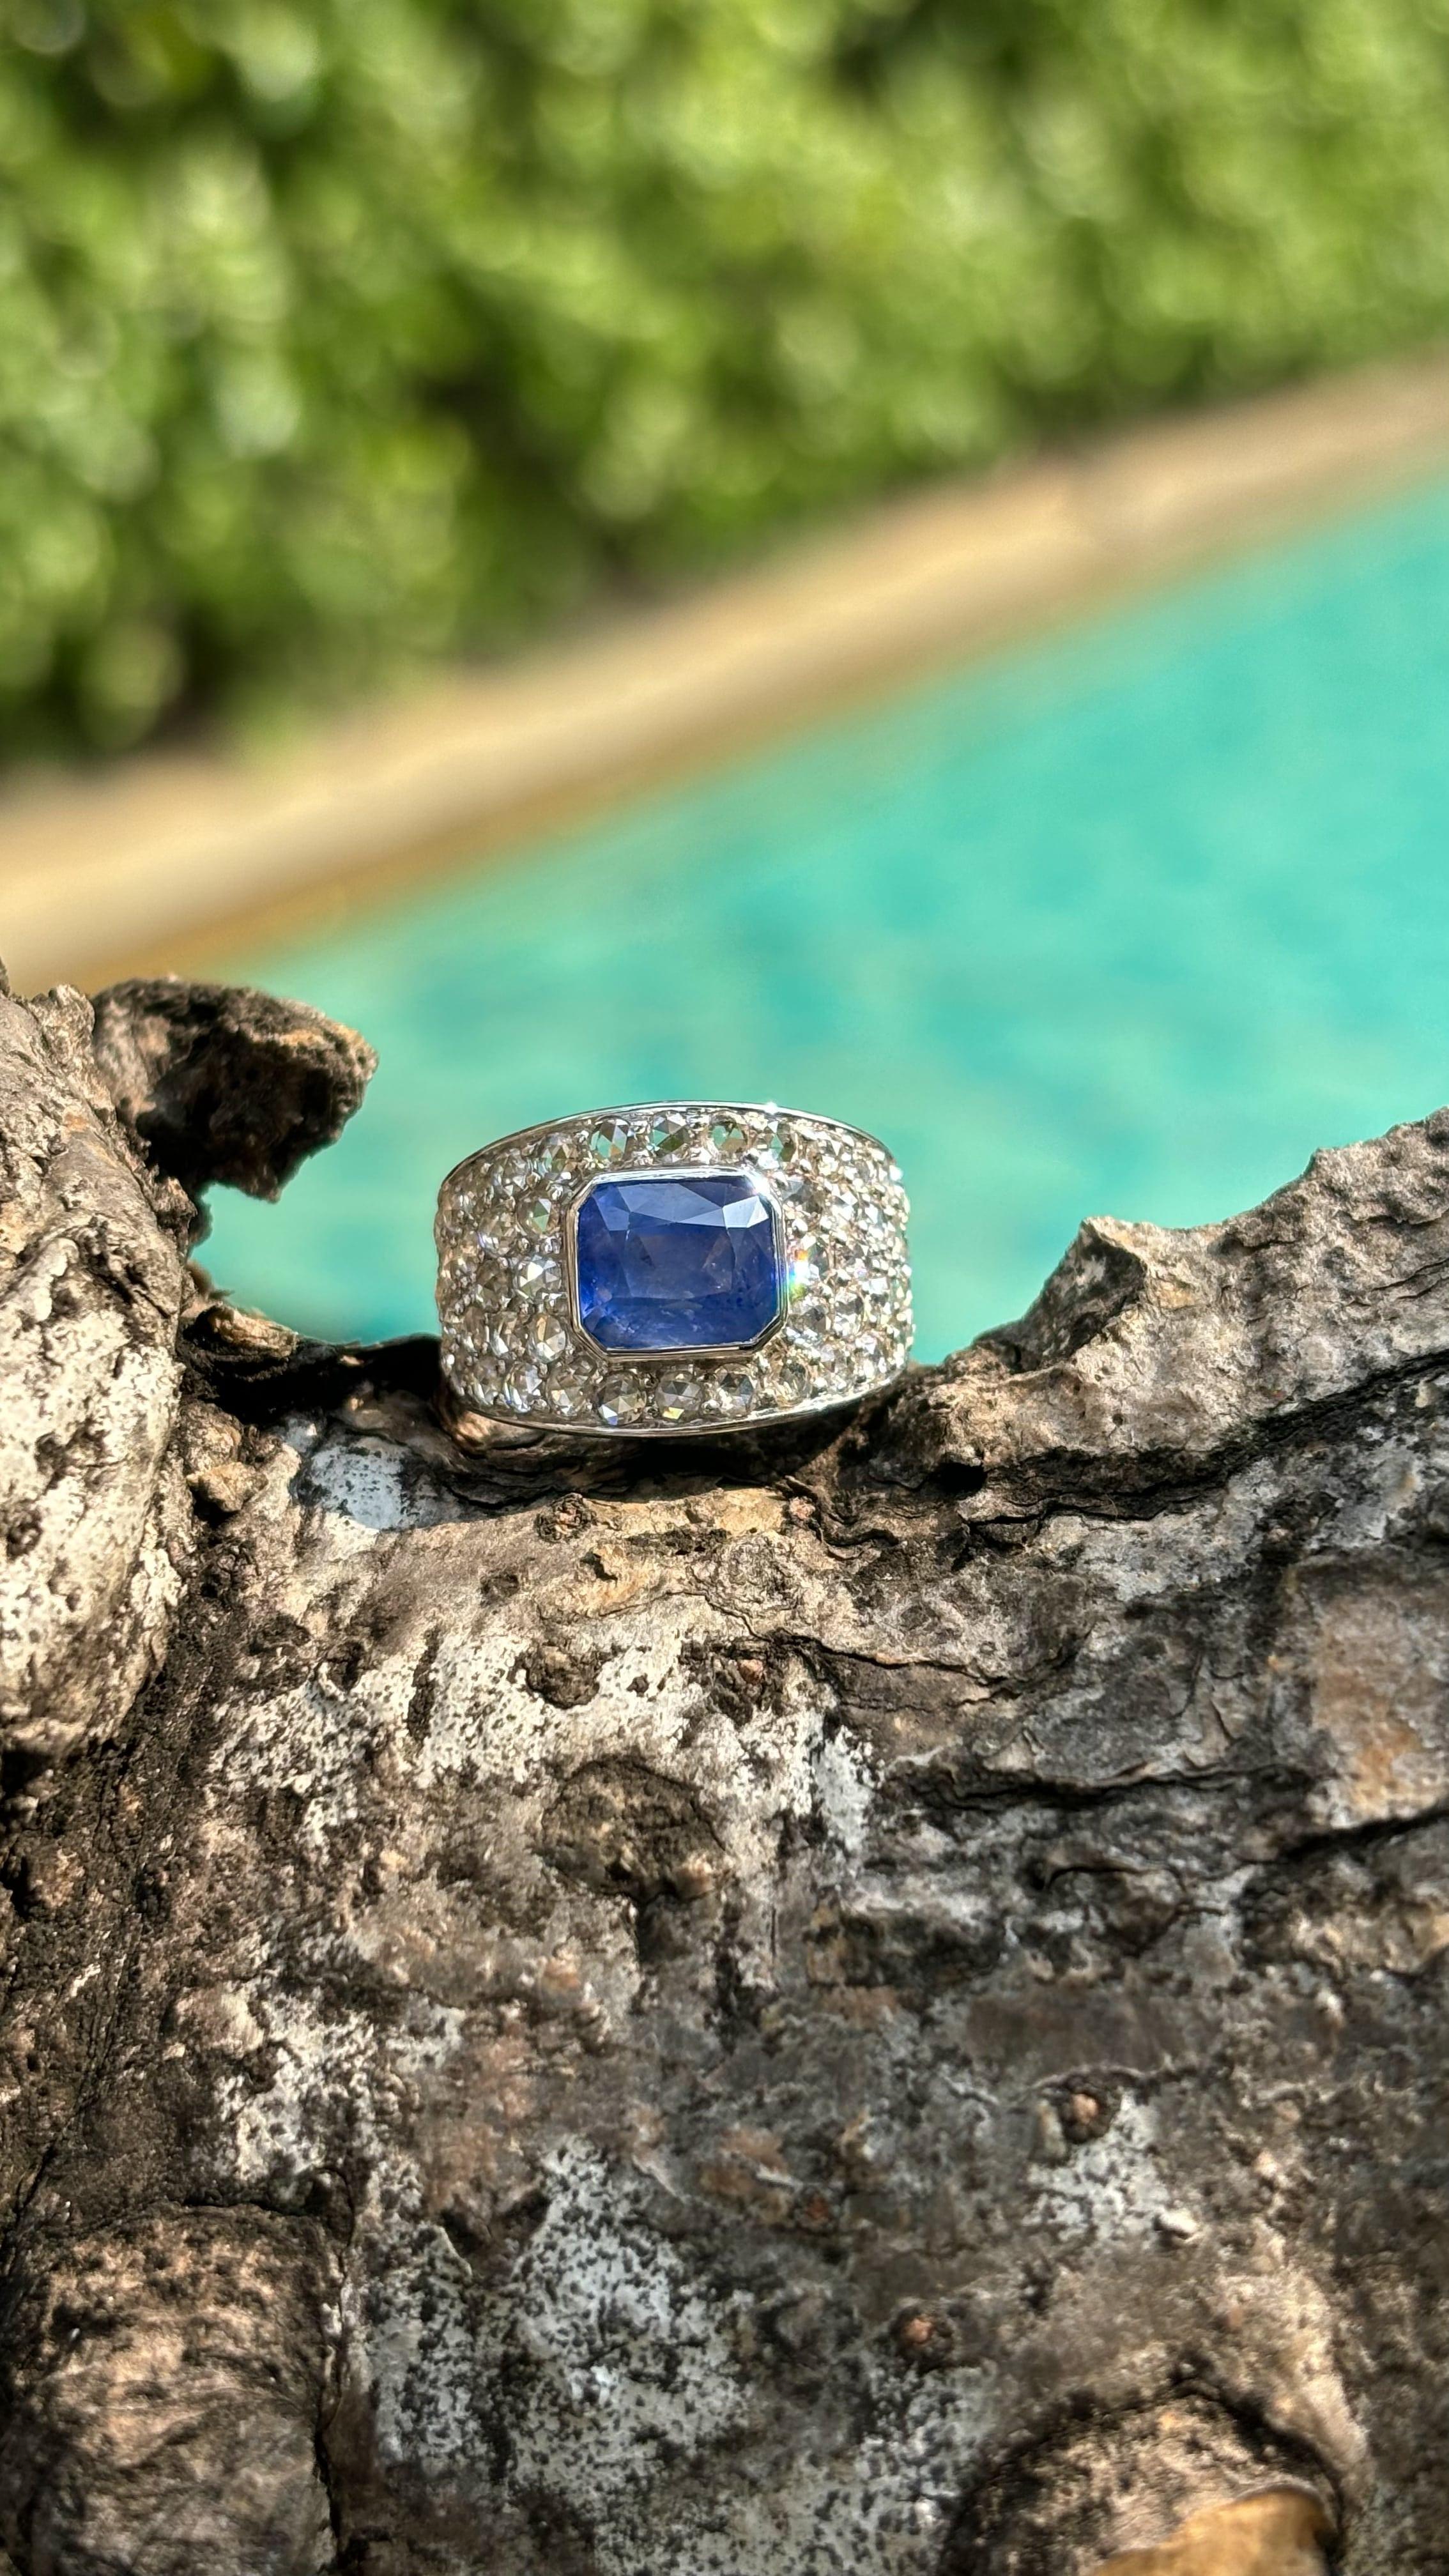 Presenting a lustrous, gemstone ring for men,  that will win over anyone’s heart with its sheer beauty and sophistication. This stunning piece showcases a majestic, emerald-cut Sapphire as its centerpiece, radiating a breathtaking luster and